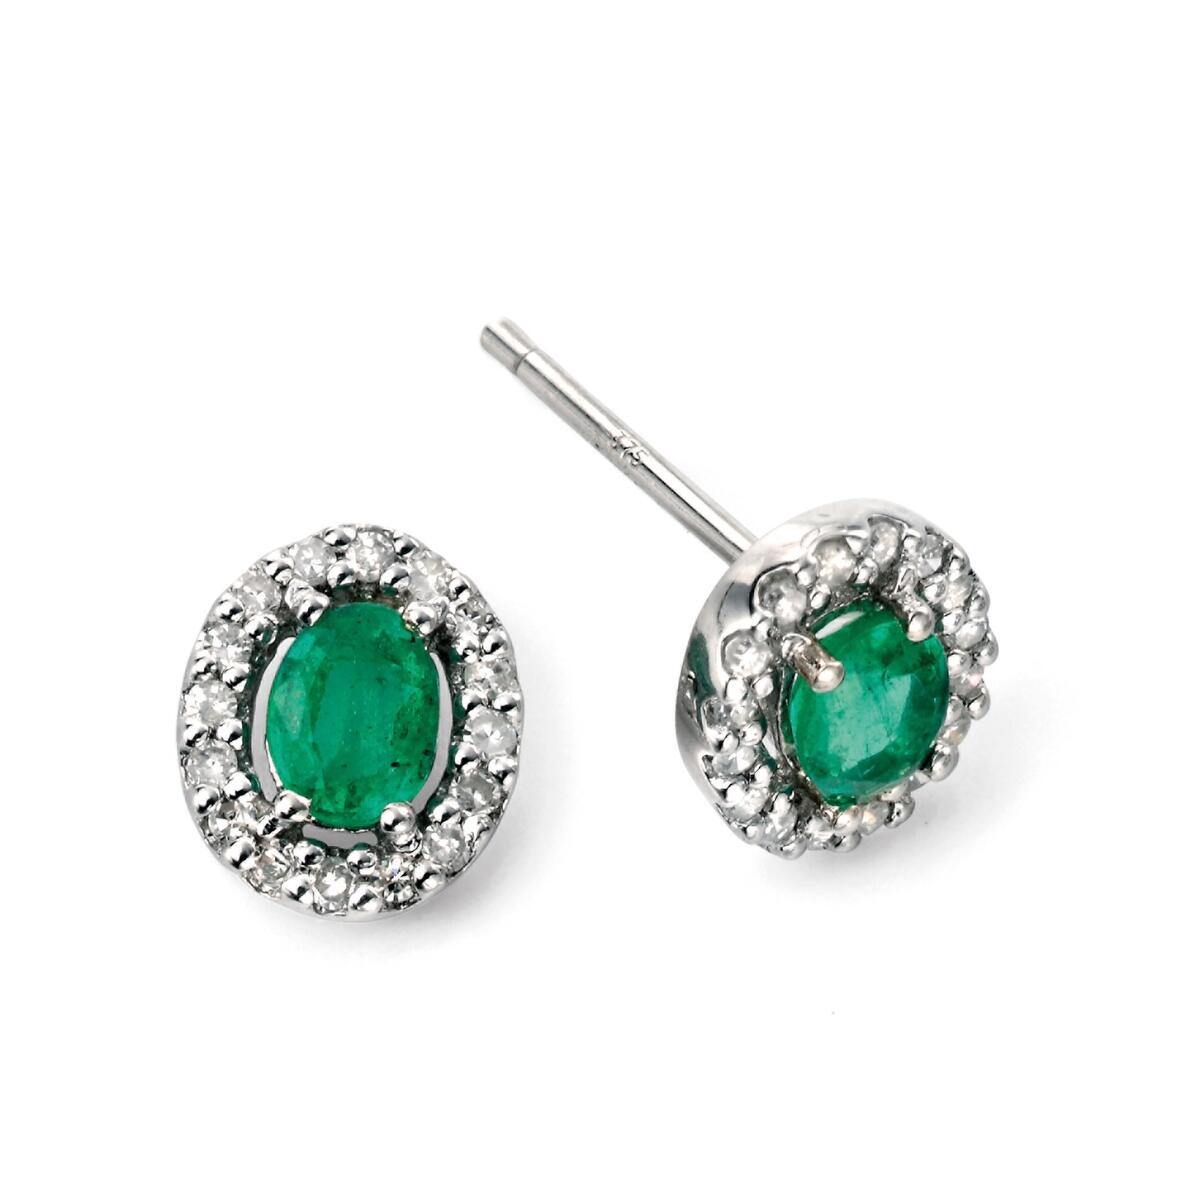 9Ct White Gold Emerald and Diamond Earrings